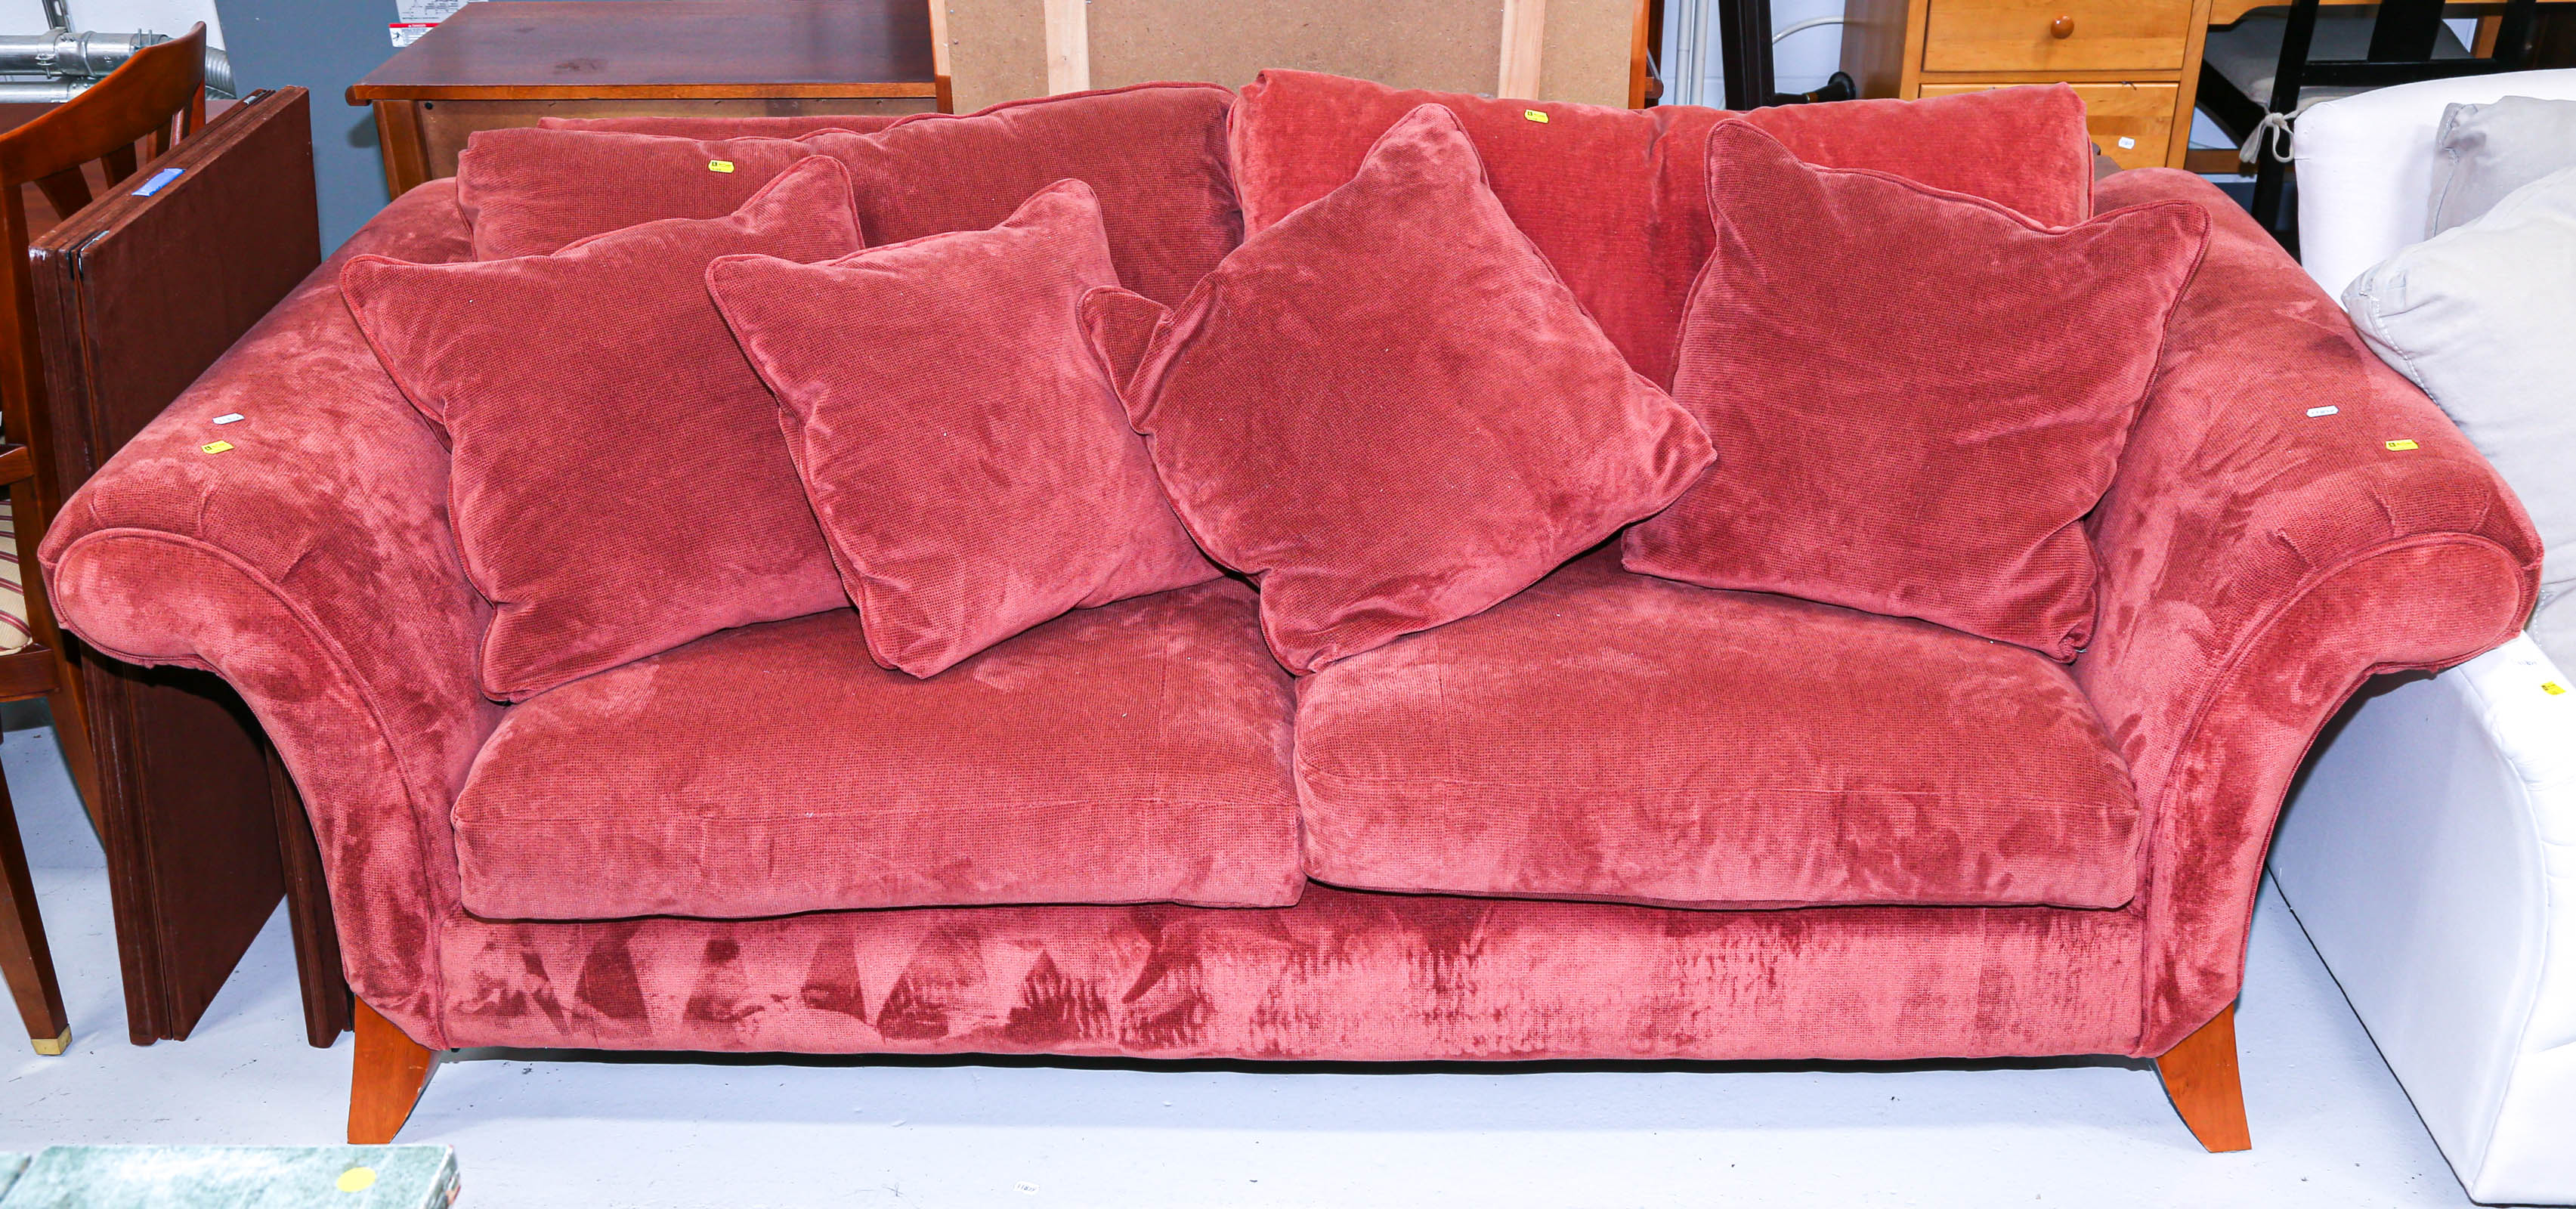 CONTEMPORARY CLASSICAL STYLE SOFA Modern;